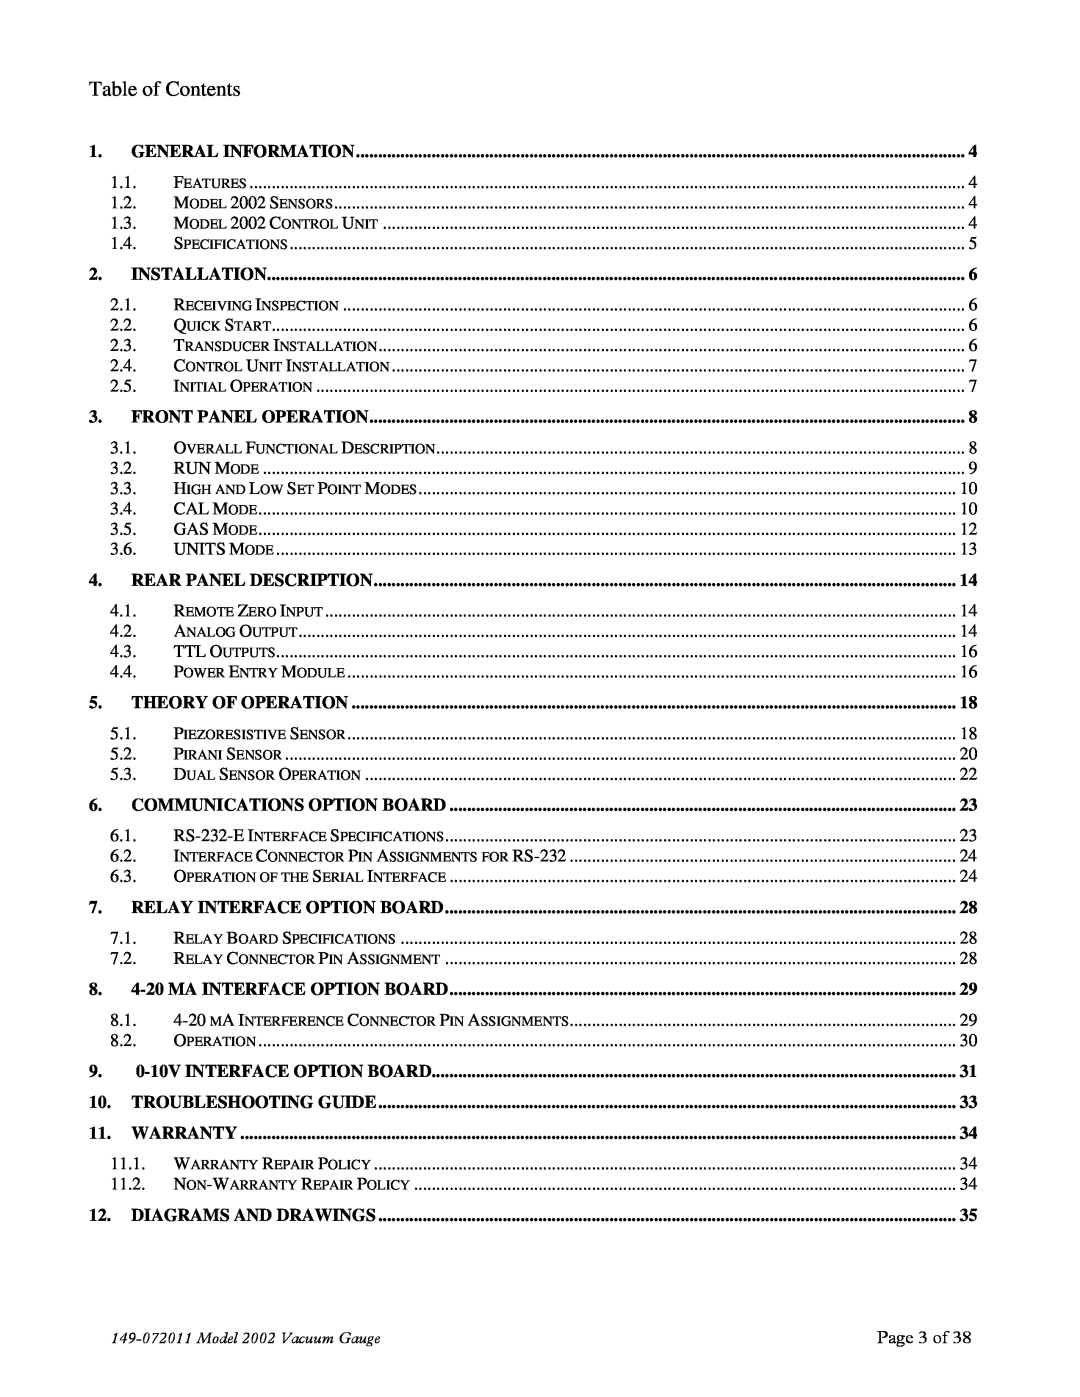 Teledyne 2002 instruction manual Table of Contents 